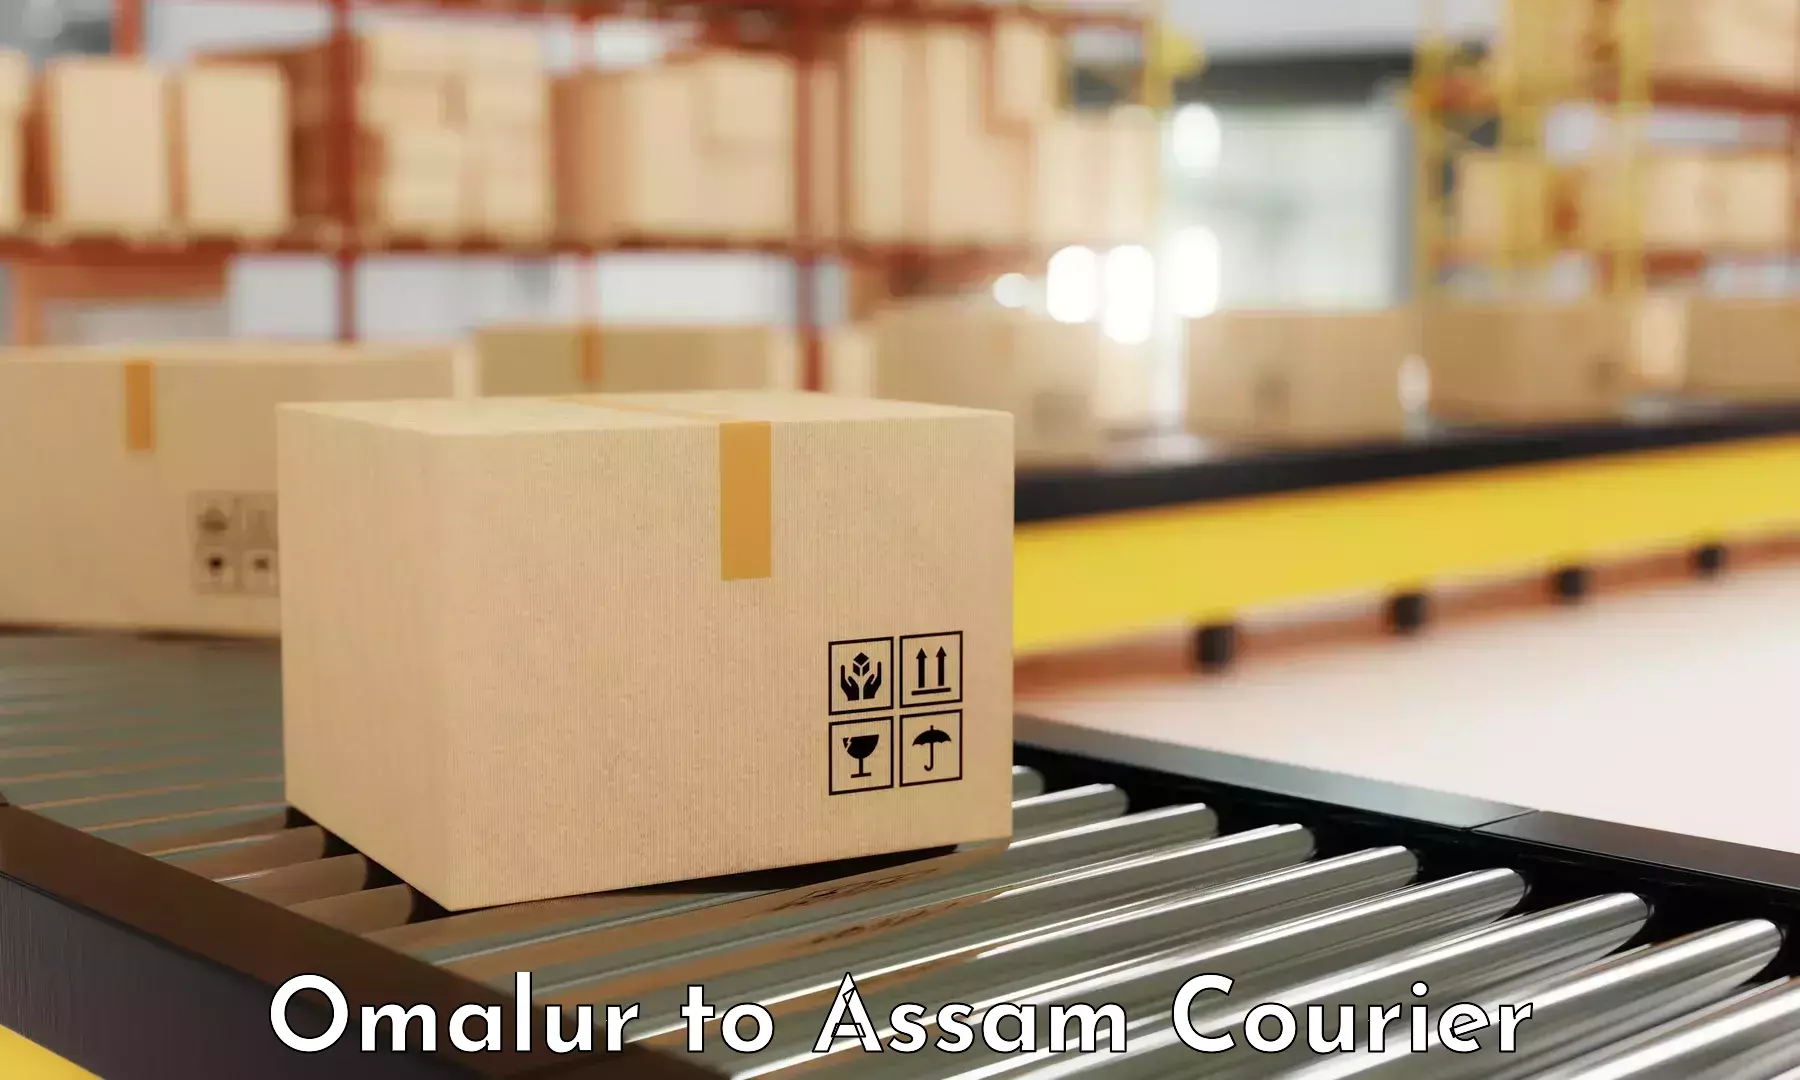 Courier service efficiency Omalur to Mariani